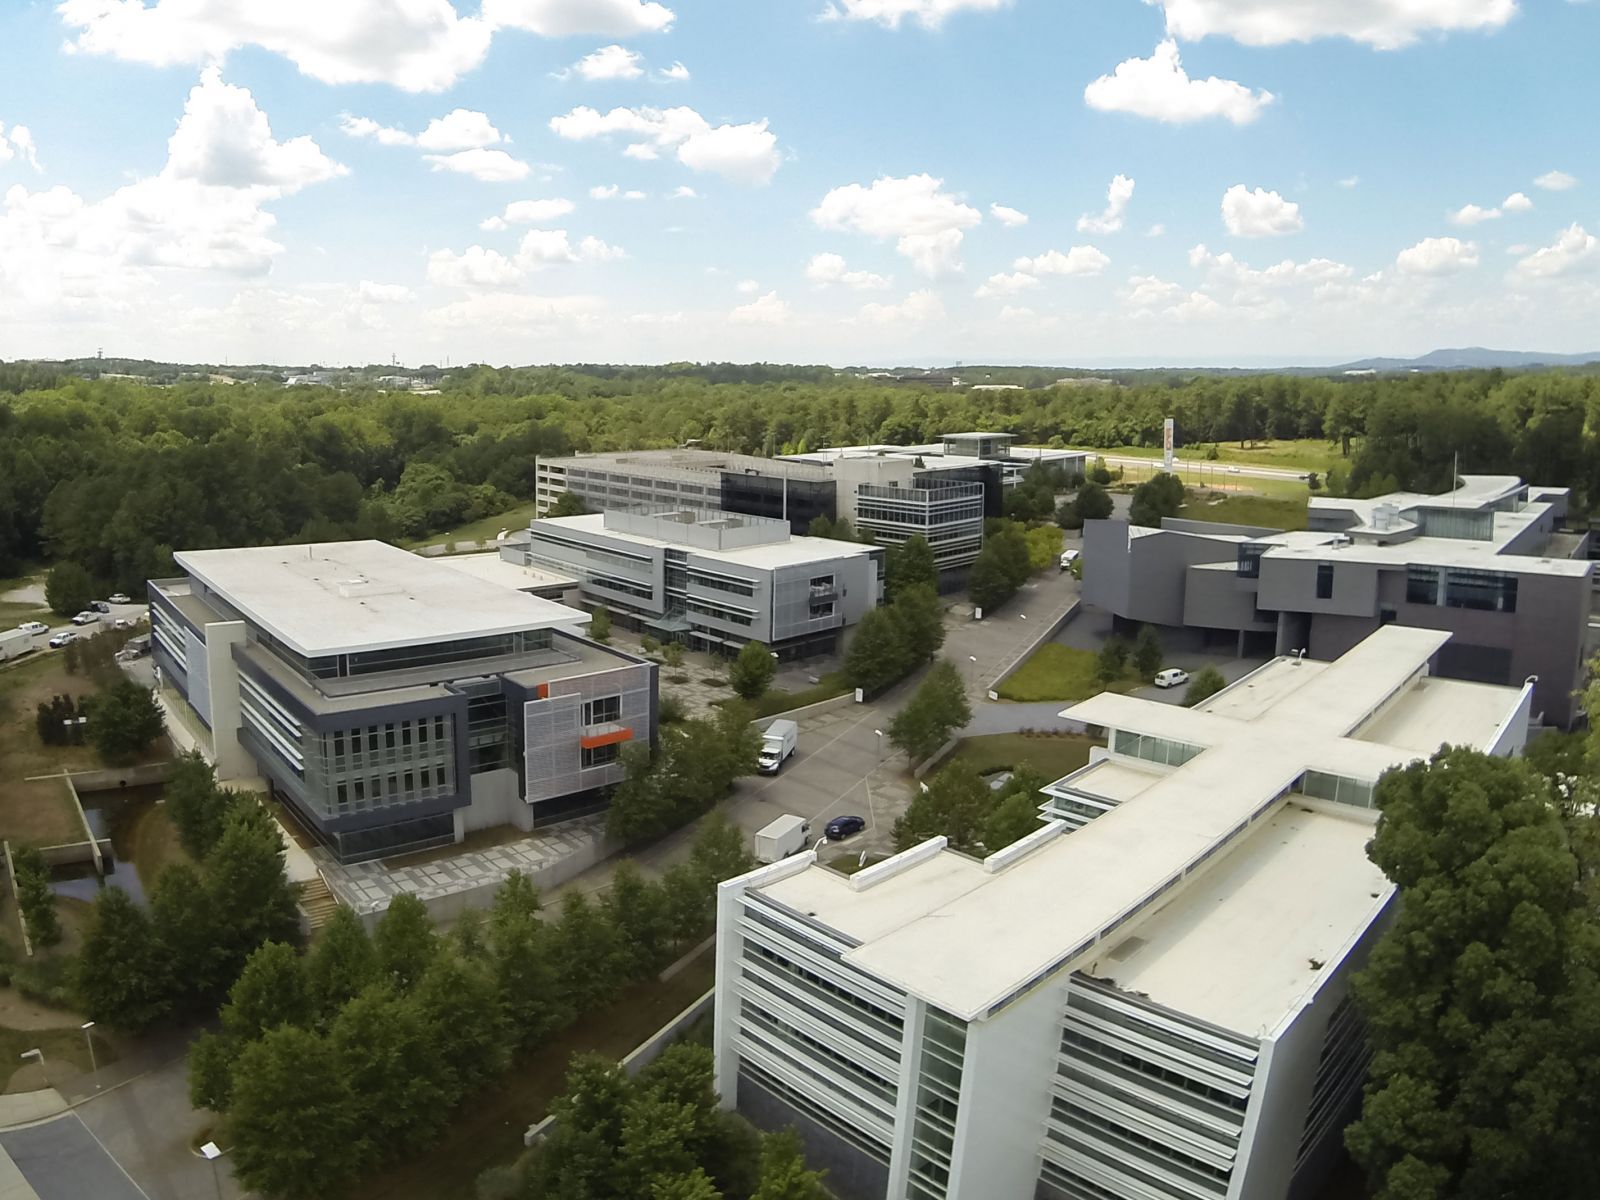 The Clemson University International Center for  Automotive Research is a 250-acre advanced-technology research campus founded in 2007. (Photo/Clemson University)